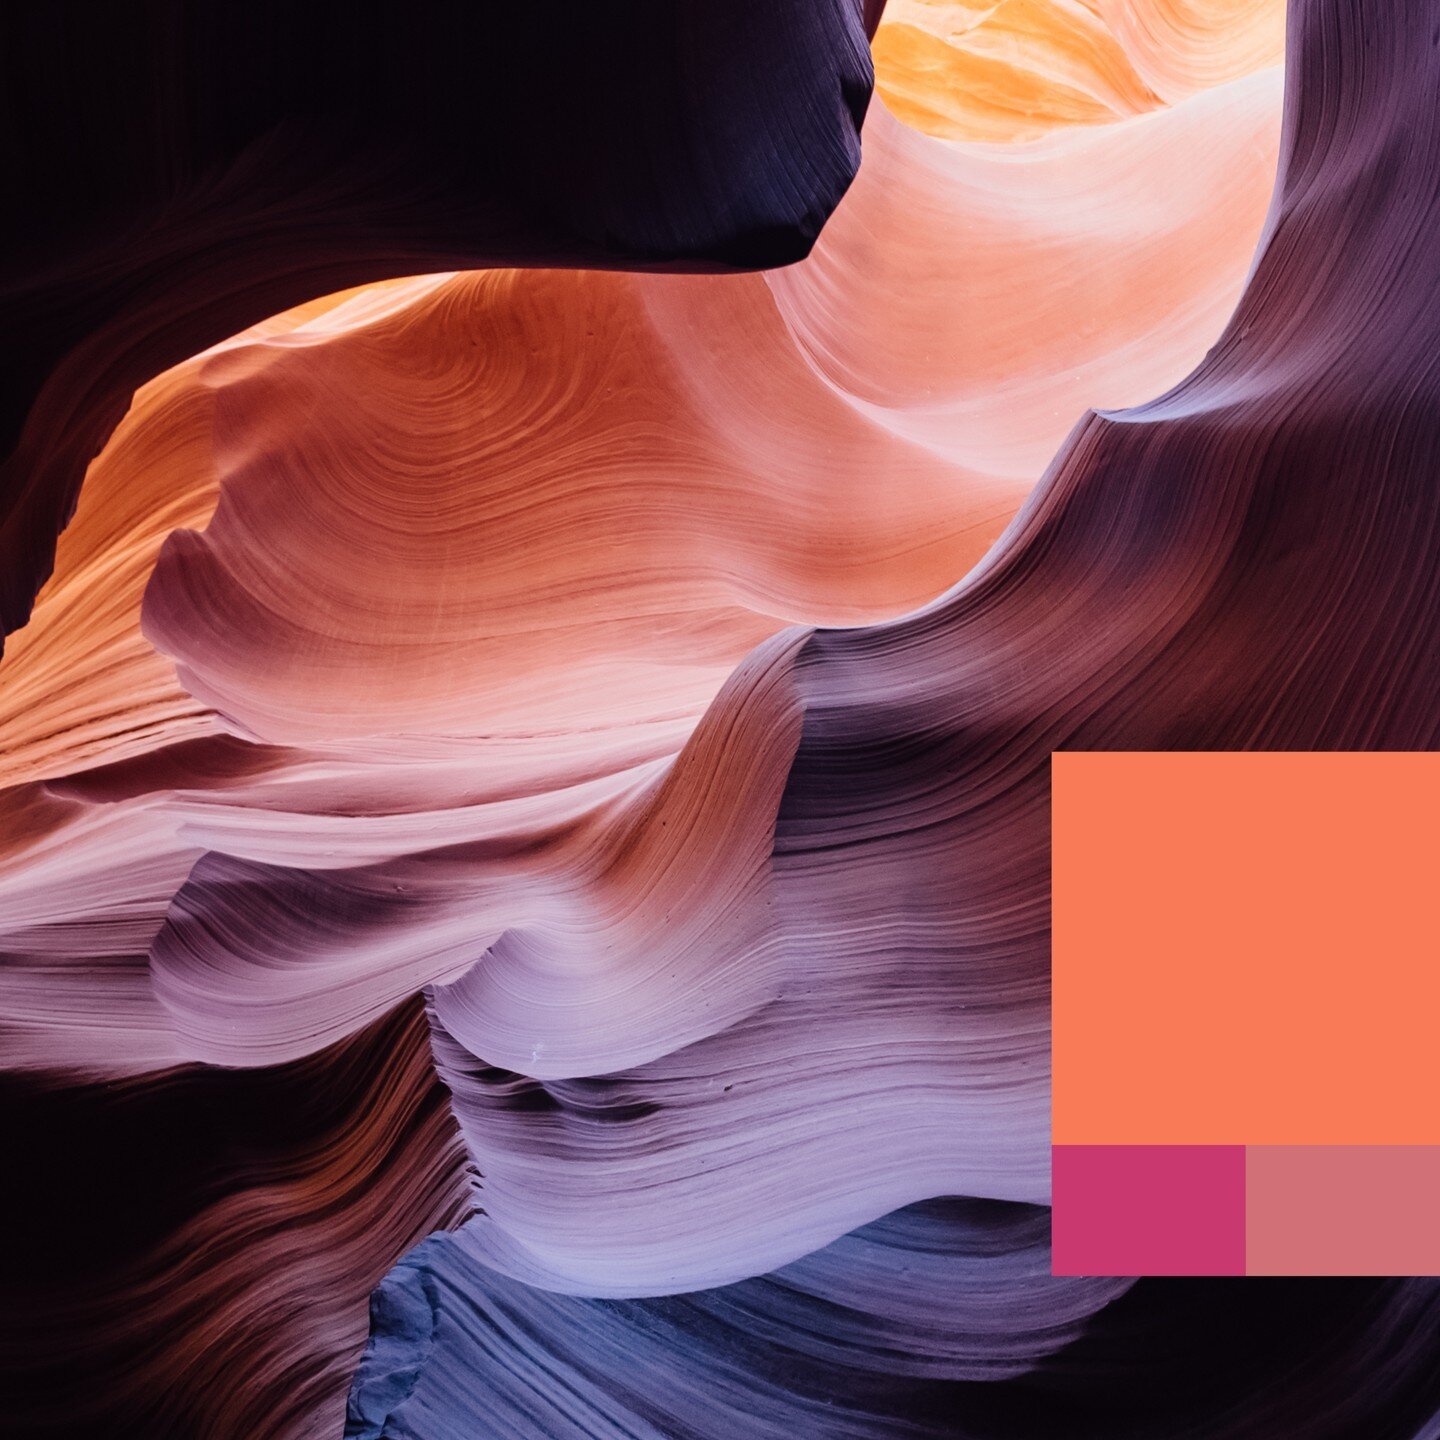 Color inspo of the day. Check out this amazing landscape from the Navajo Upper Antelope Canyon, in Arizona. Water erosion took thousands of years to create this canyon. And when the sun filters though the narrow openings a magical otherworldly effect